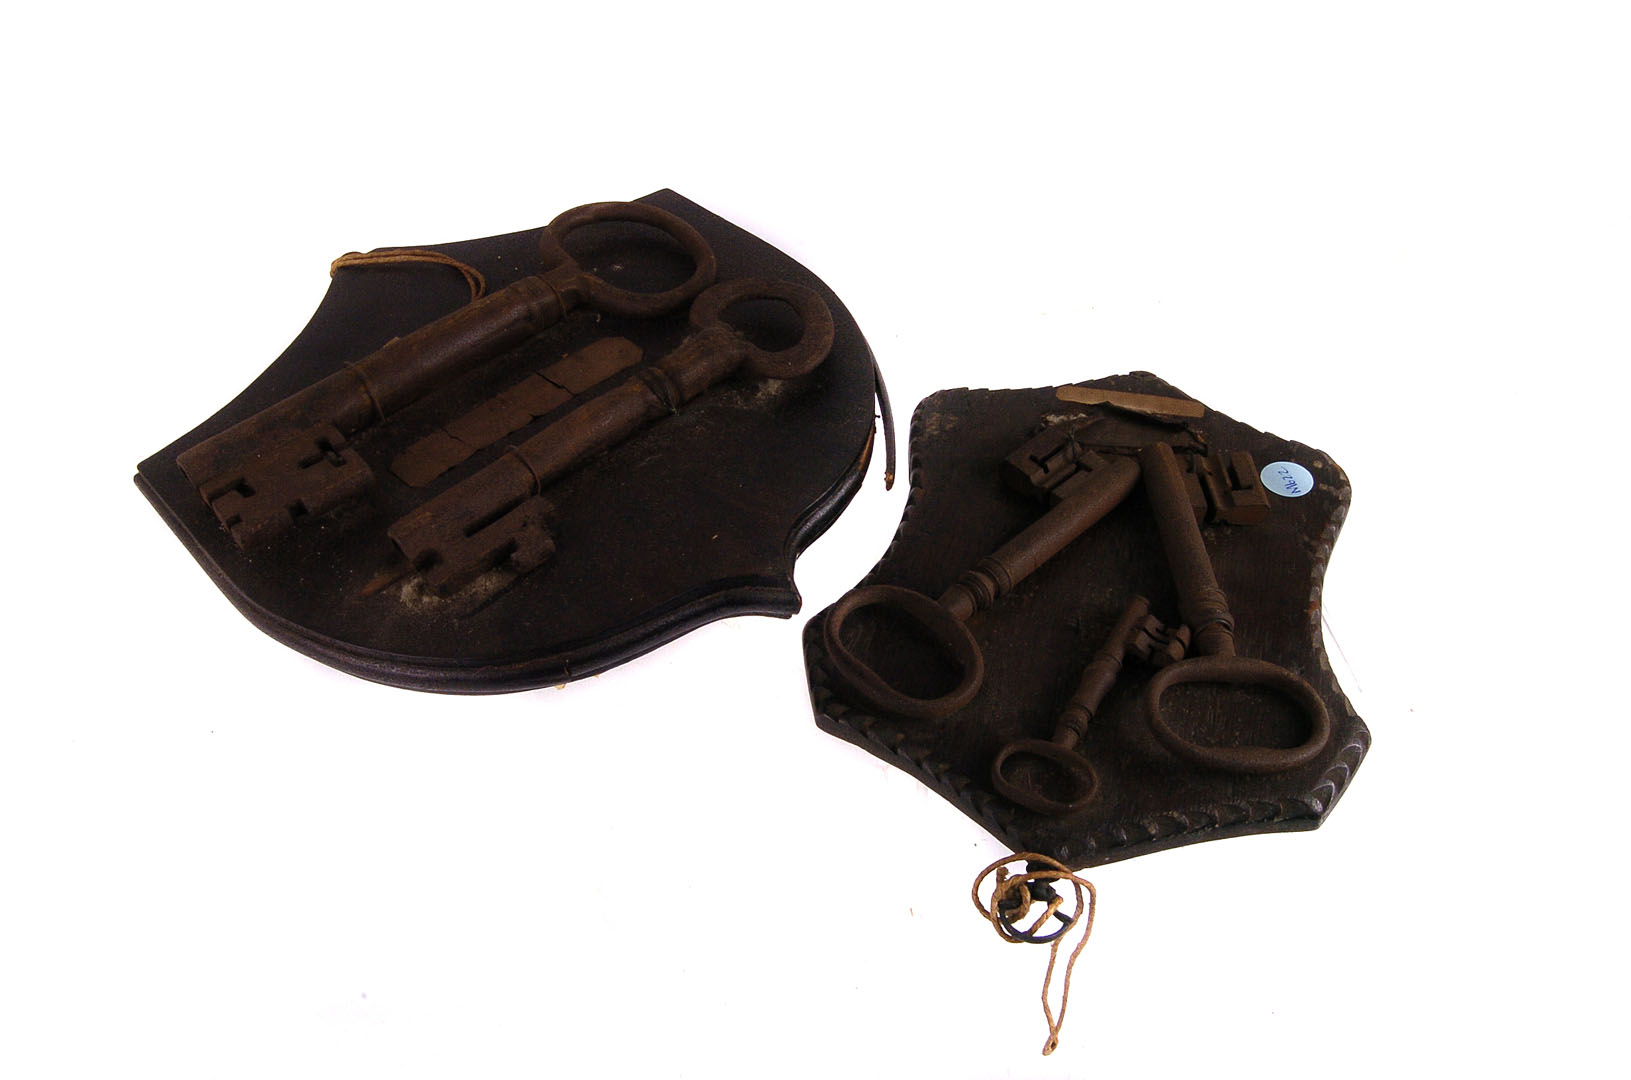 A set of 18th century keys for Old Newgate Prison, these keys were used for the corridor leading